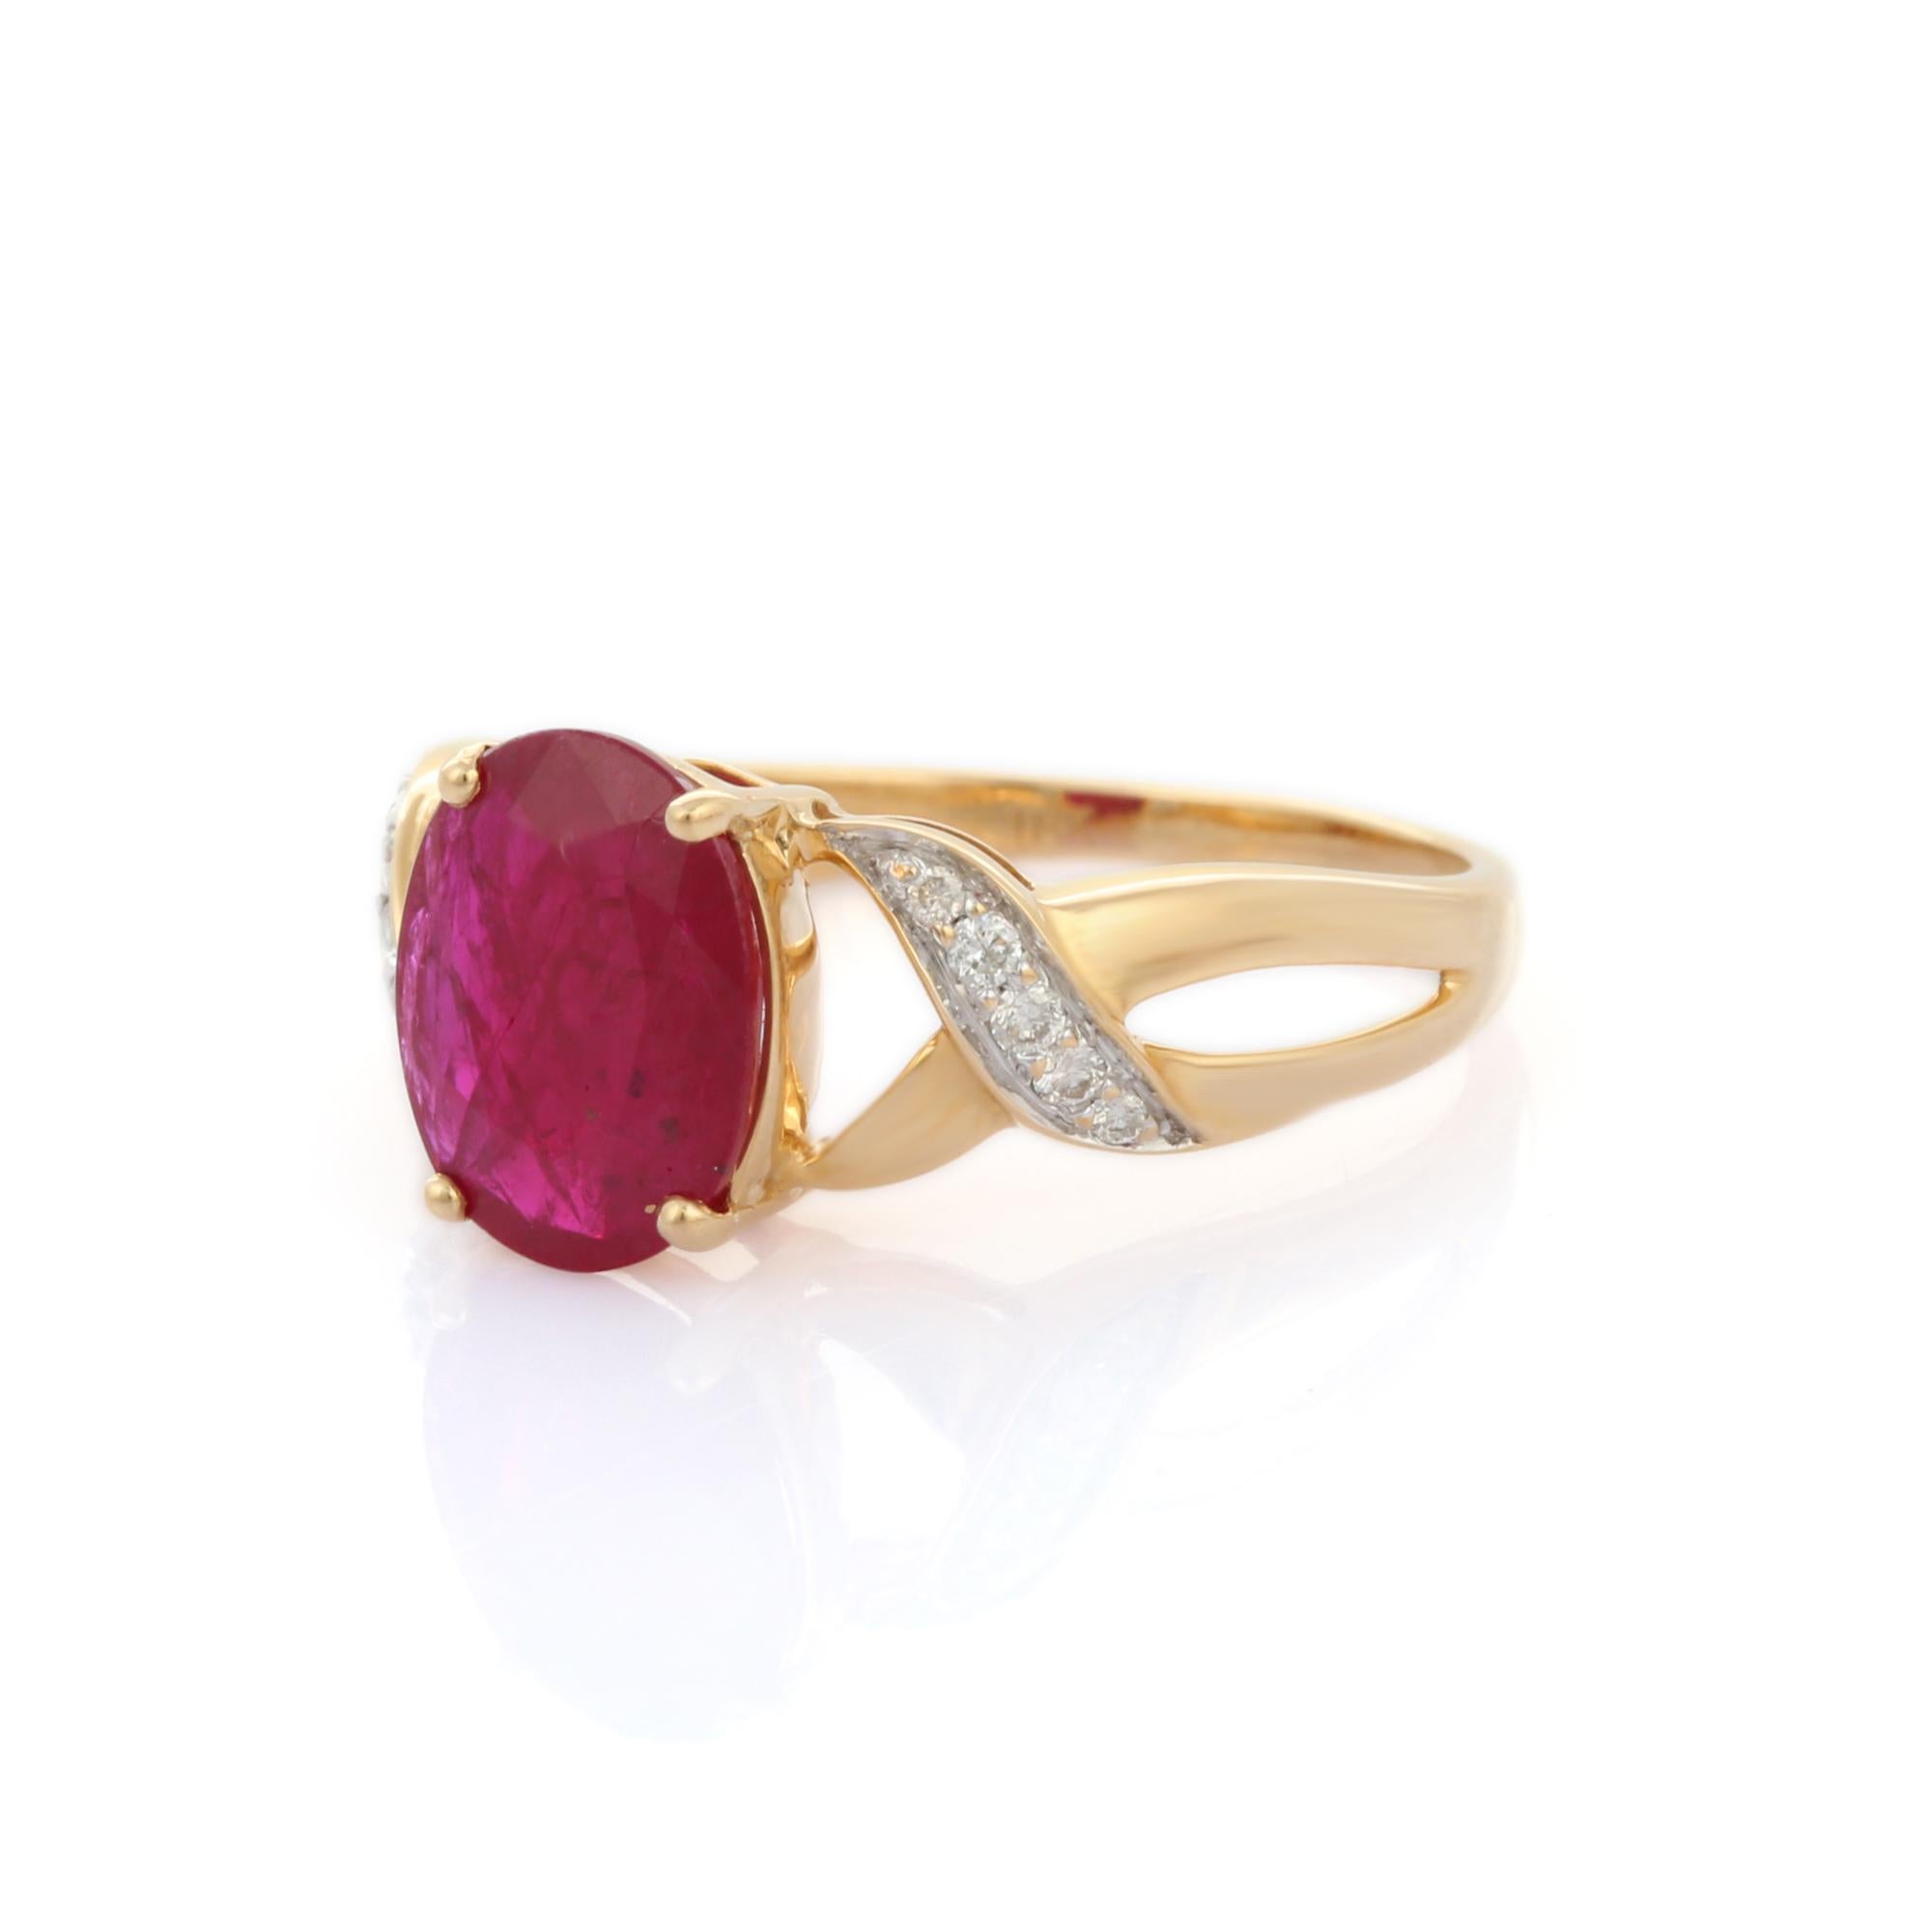 For Sale:  2.28 Carat Ruby Side Wave Diamond Engagement Ring in 18K Yellow Gold 3